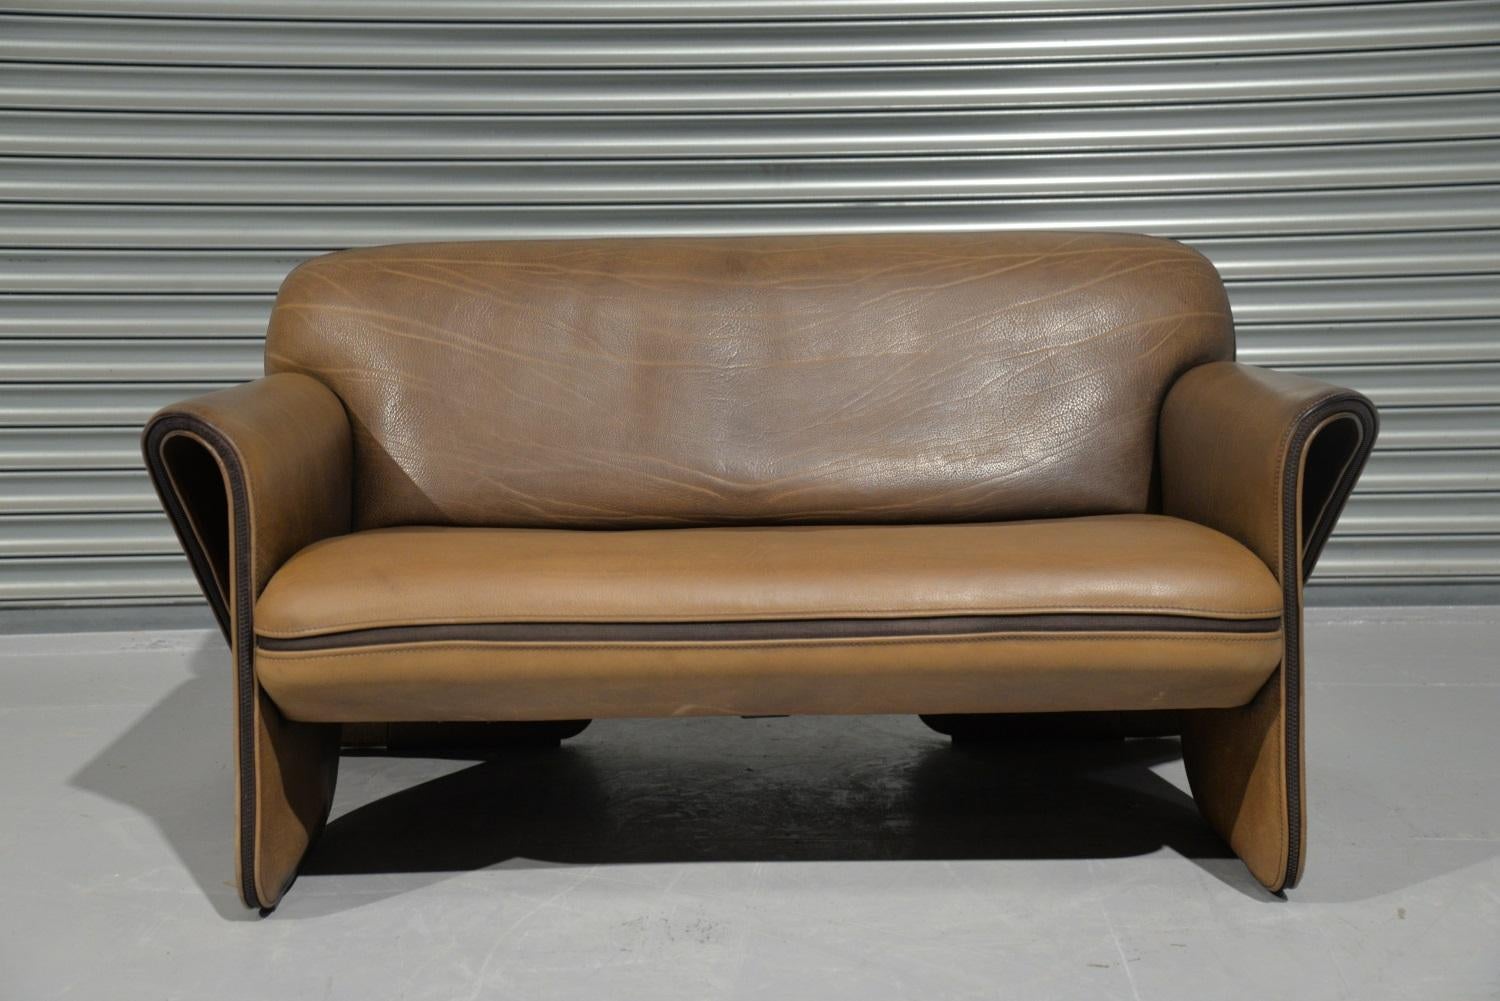 Discounted airfreight for our US and International customers (from 2 weeks door to door).

We are delighted to bring to you an ultra rare vintage De Sede DS 125 sofa by Gerd Lange in 1978. These sculptural hand built pieces are upholstered in